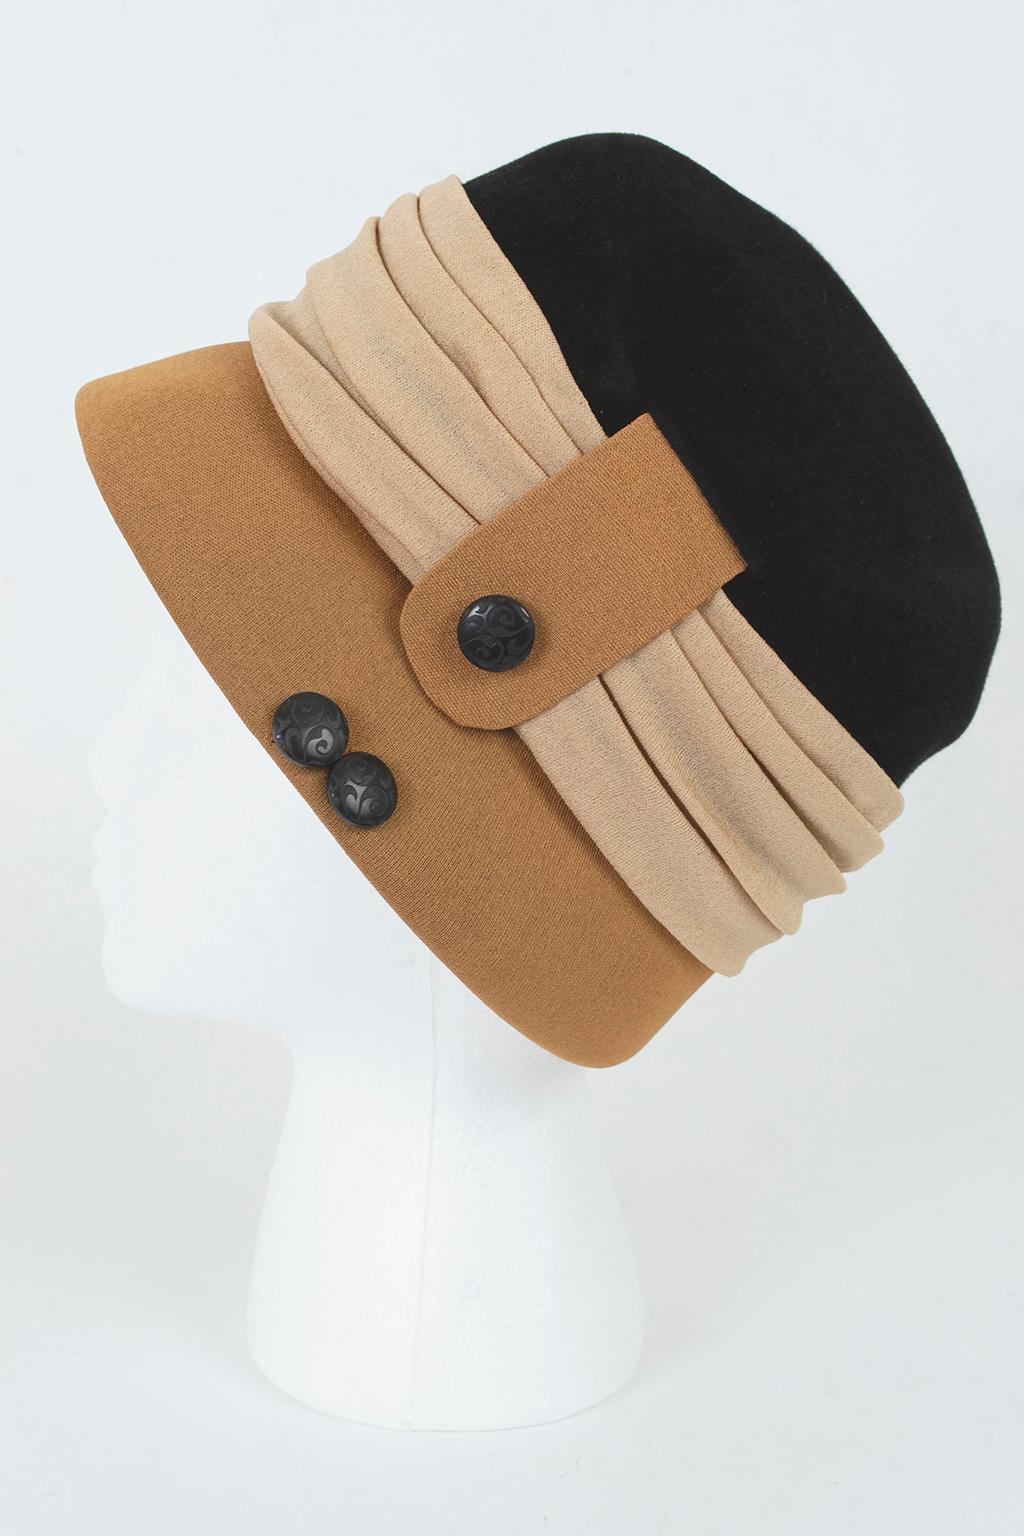 This dramatic cloche combines a modern, neutral colorway with artisanal details like carved buttons and silk jersey pleating to create a hat pairable with anything from a cocktail dress to trousers.

Silk jersey cloche with graduated brim slightly